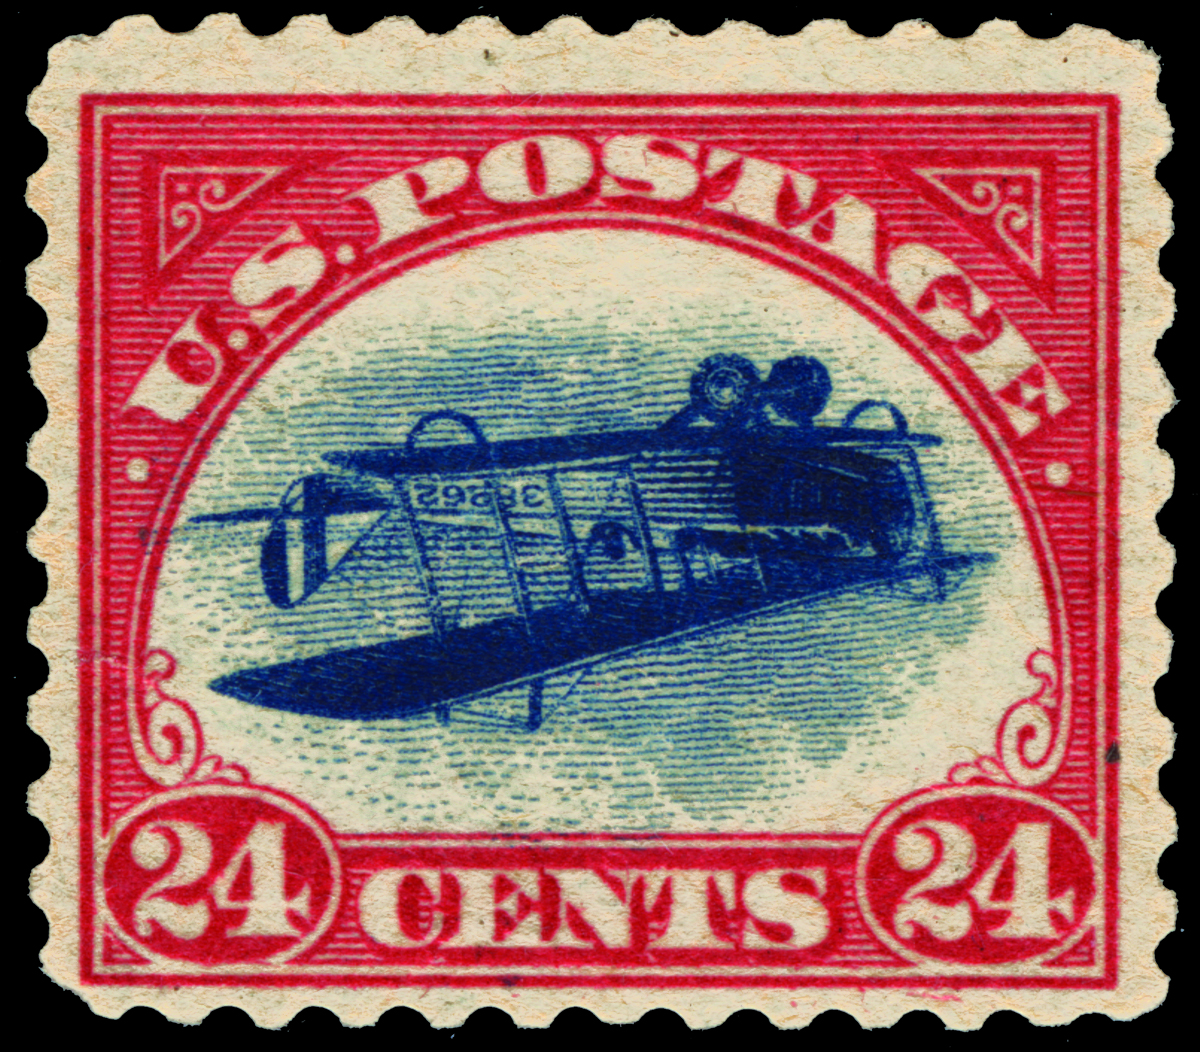 mail stamps